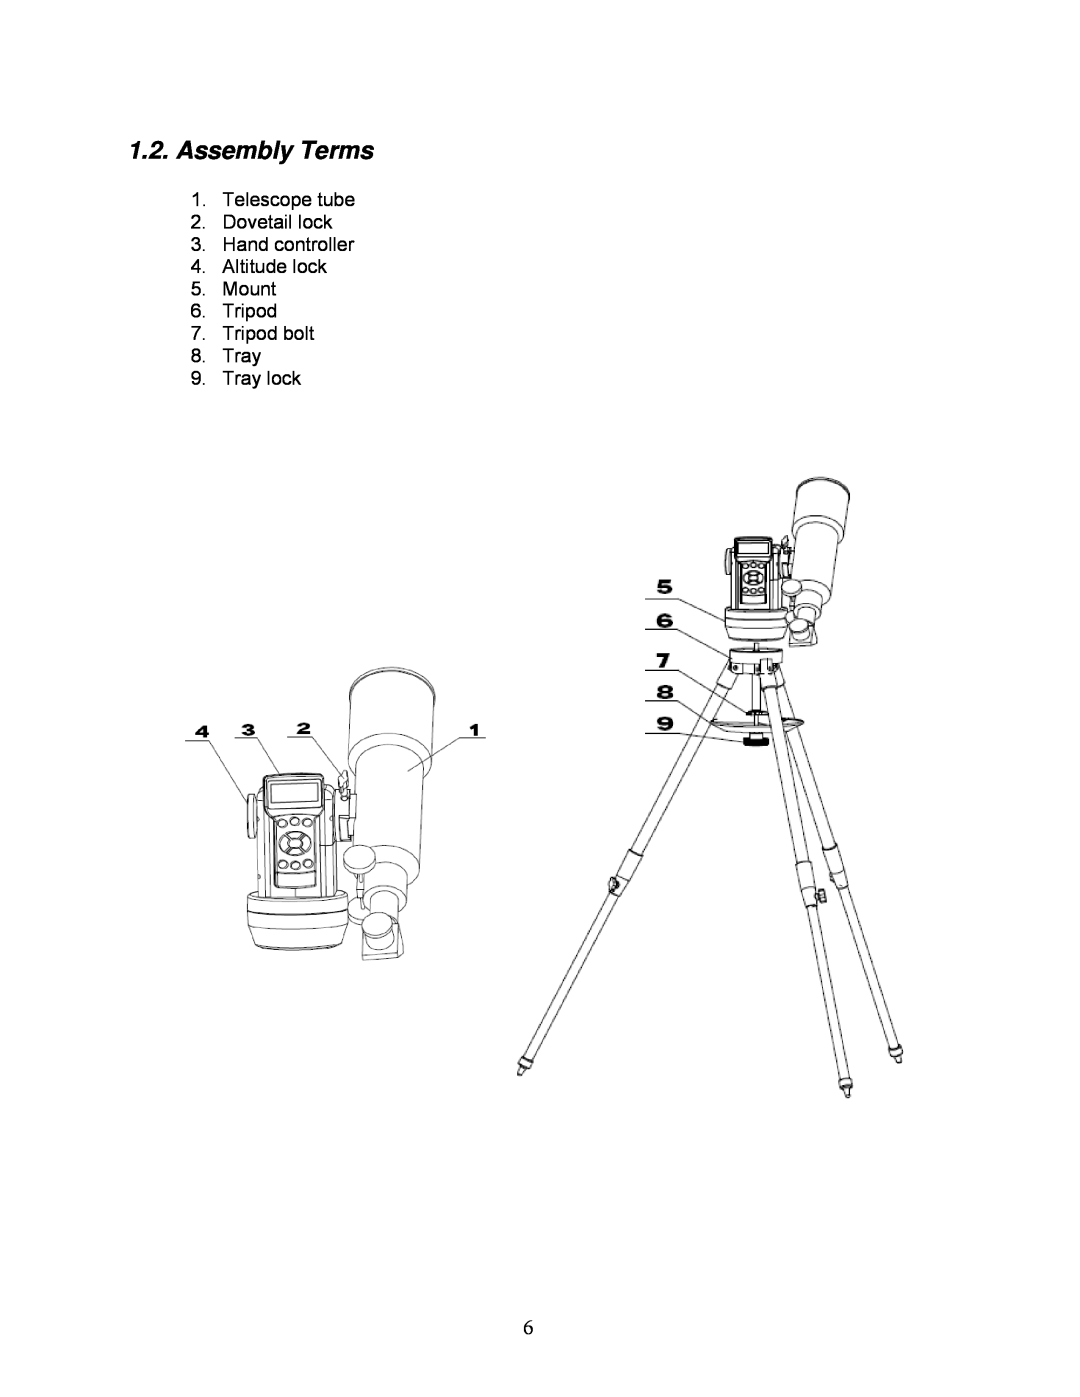 iOptron G-R80, G-MC90, G-N114 Assembly Terms, Telescope tube 2.Dovetail lock, Hand controller 4.Altitude lock 5.Mount 